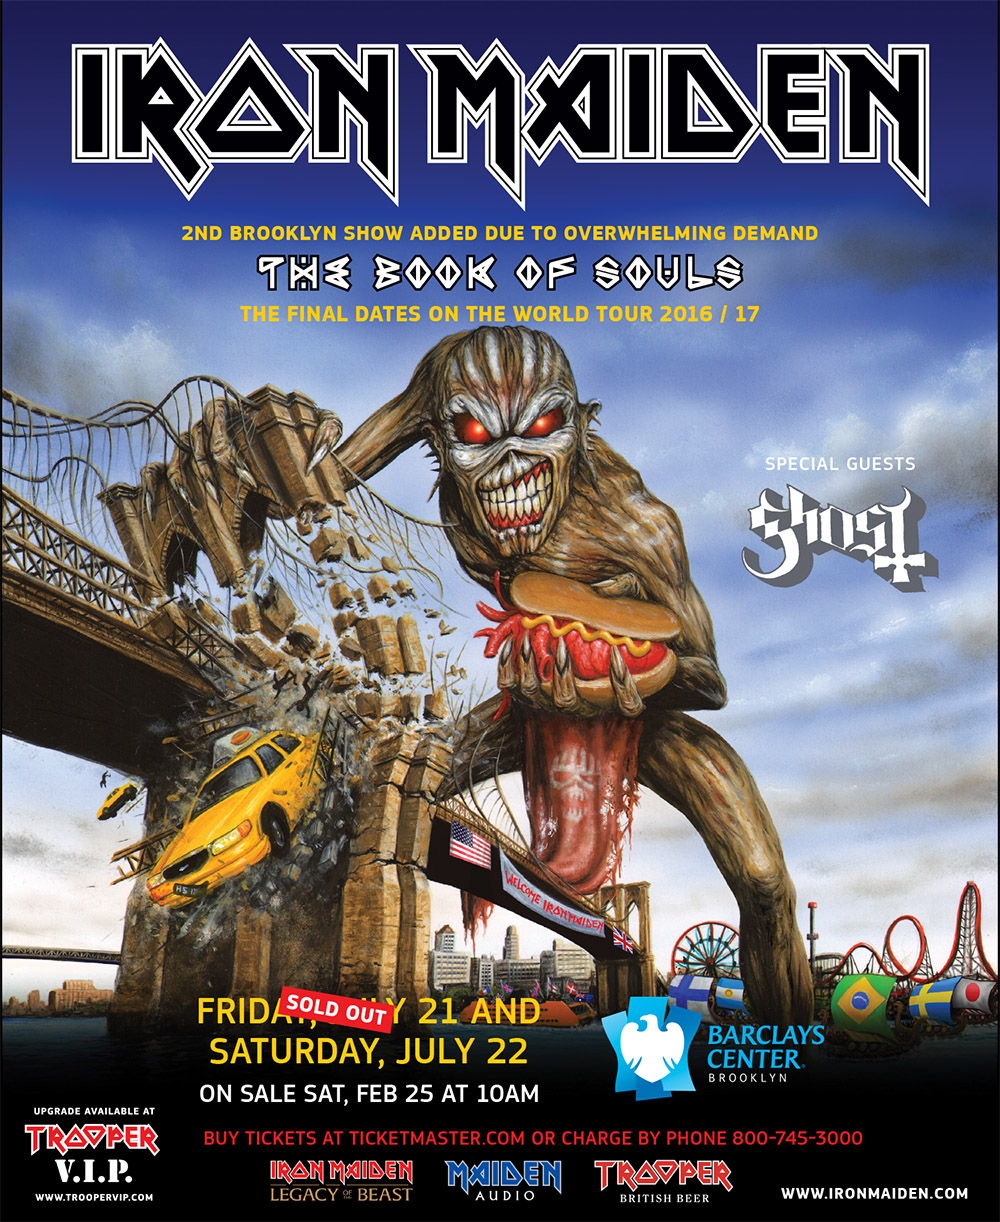 IRON MAIDEN ANNOUNCE THE LAST SHOW OF THEIR EPIC THE BOOK OF SOULS TOUR